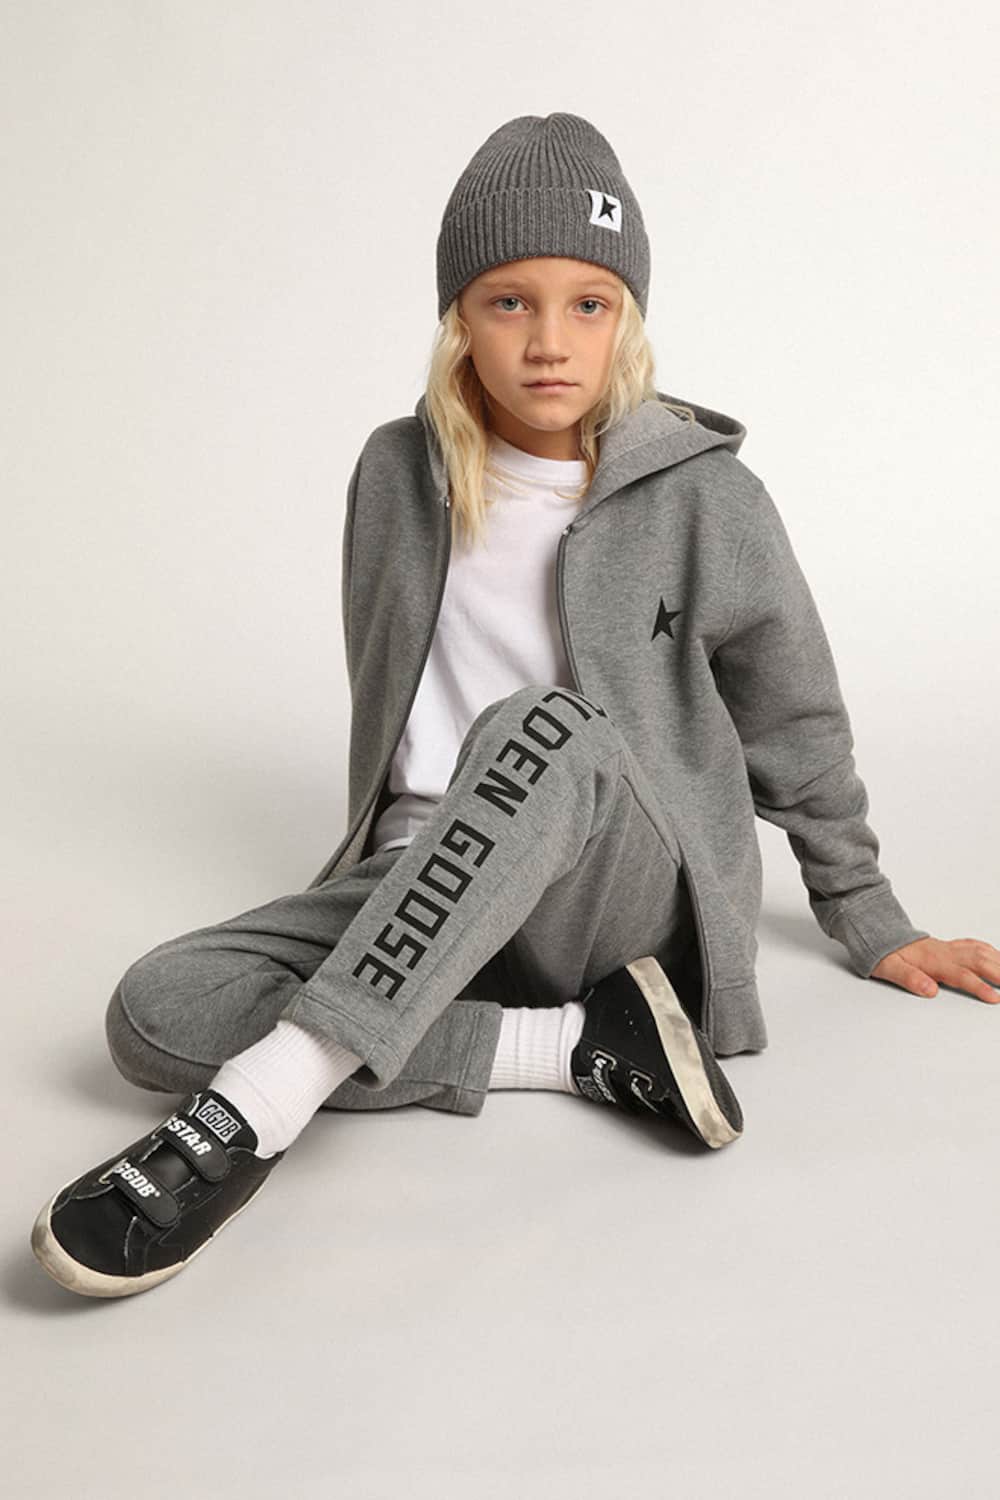 Golden Goose - Gray joggers with printed logo in 